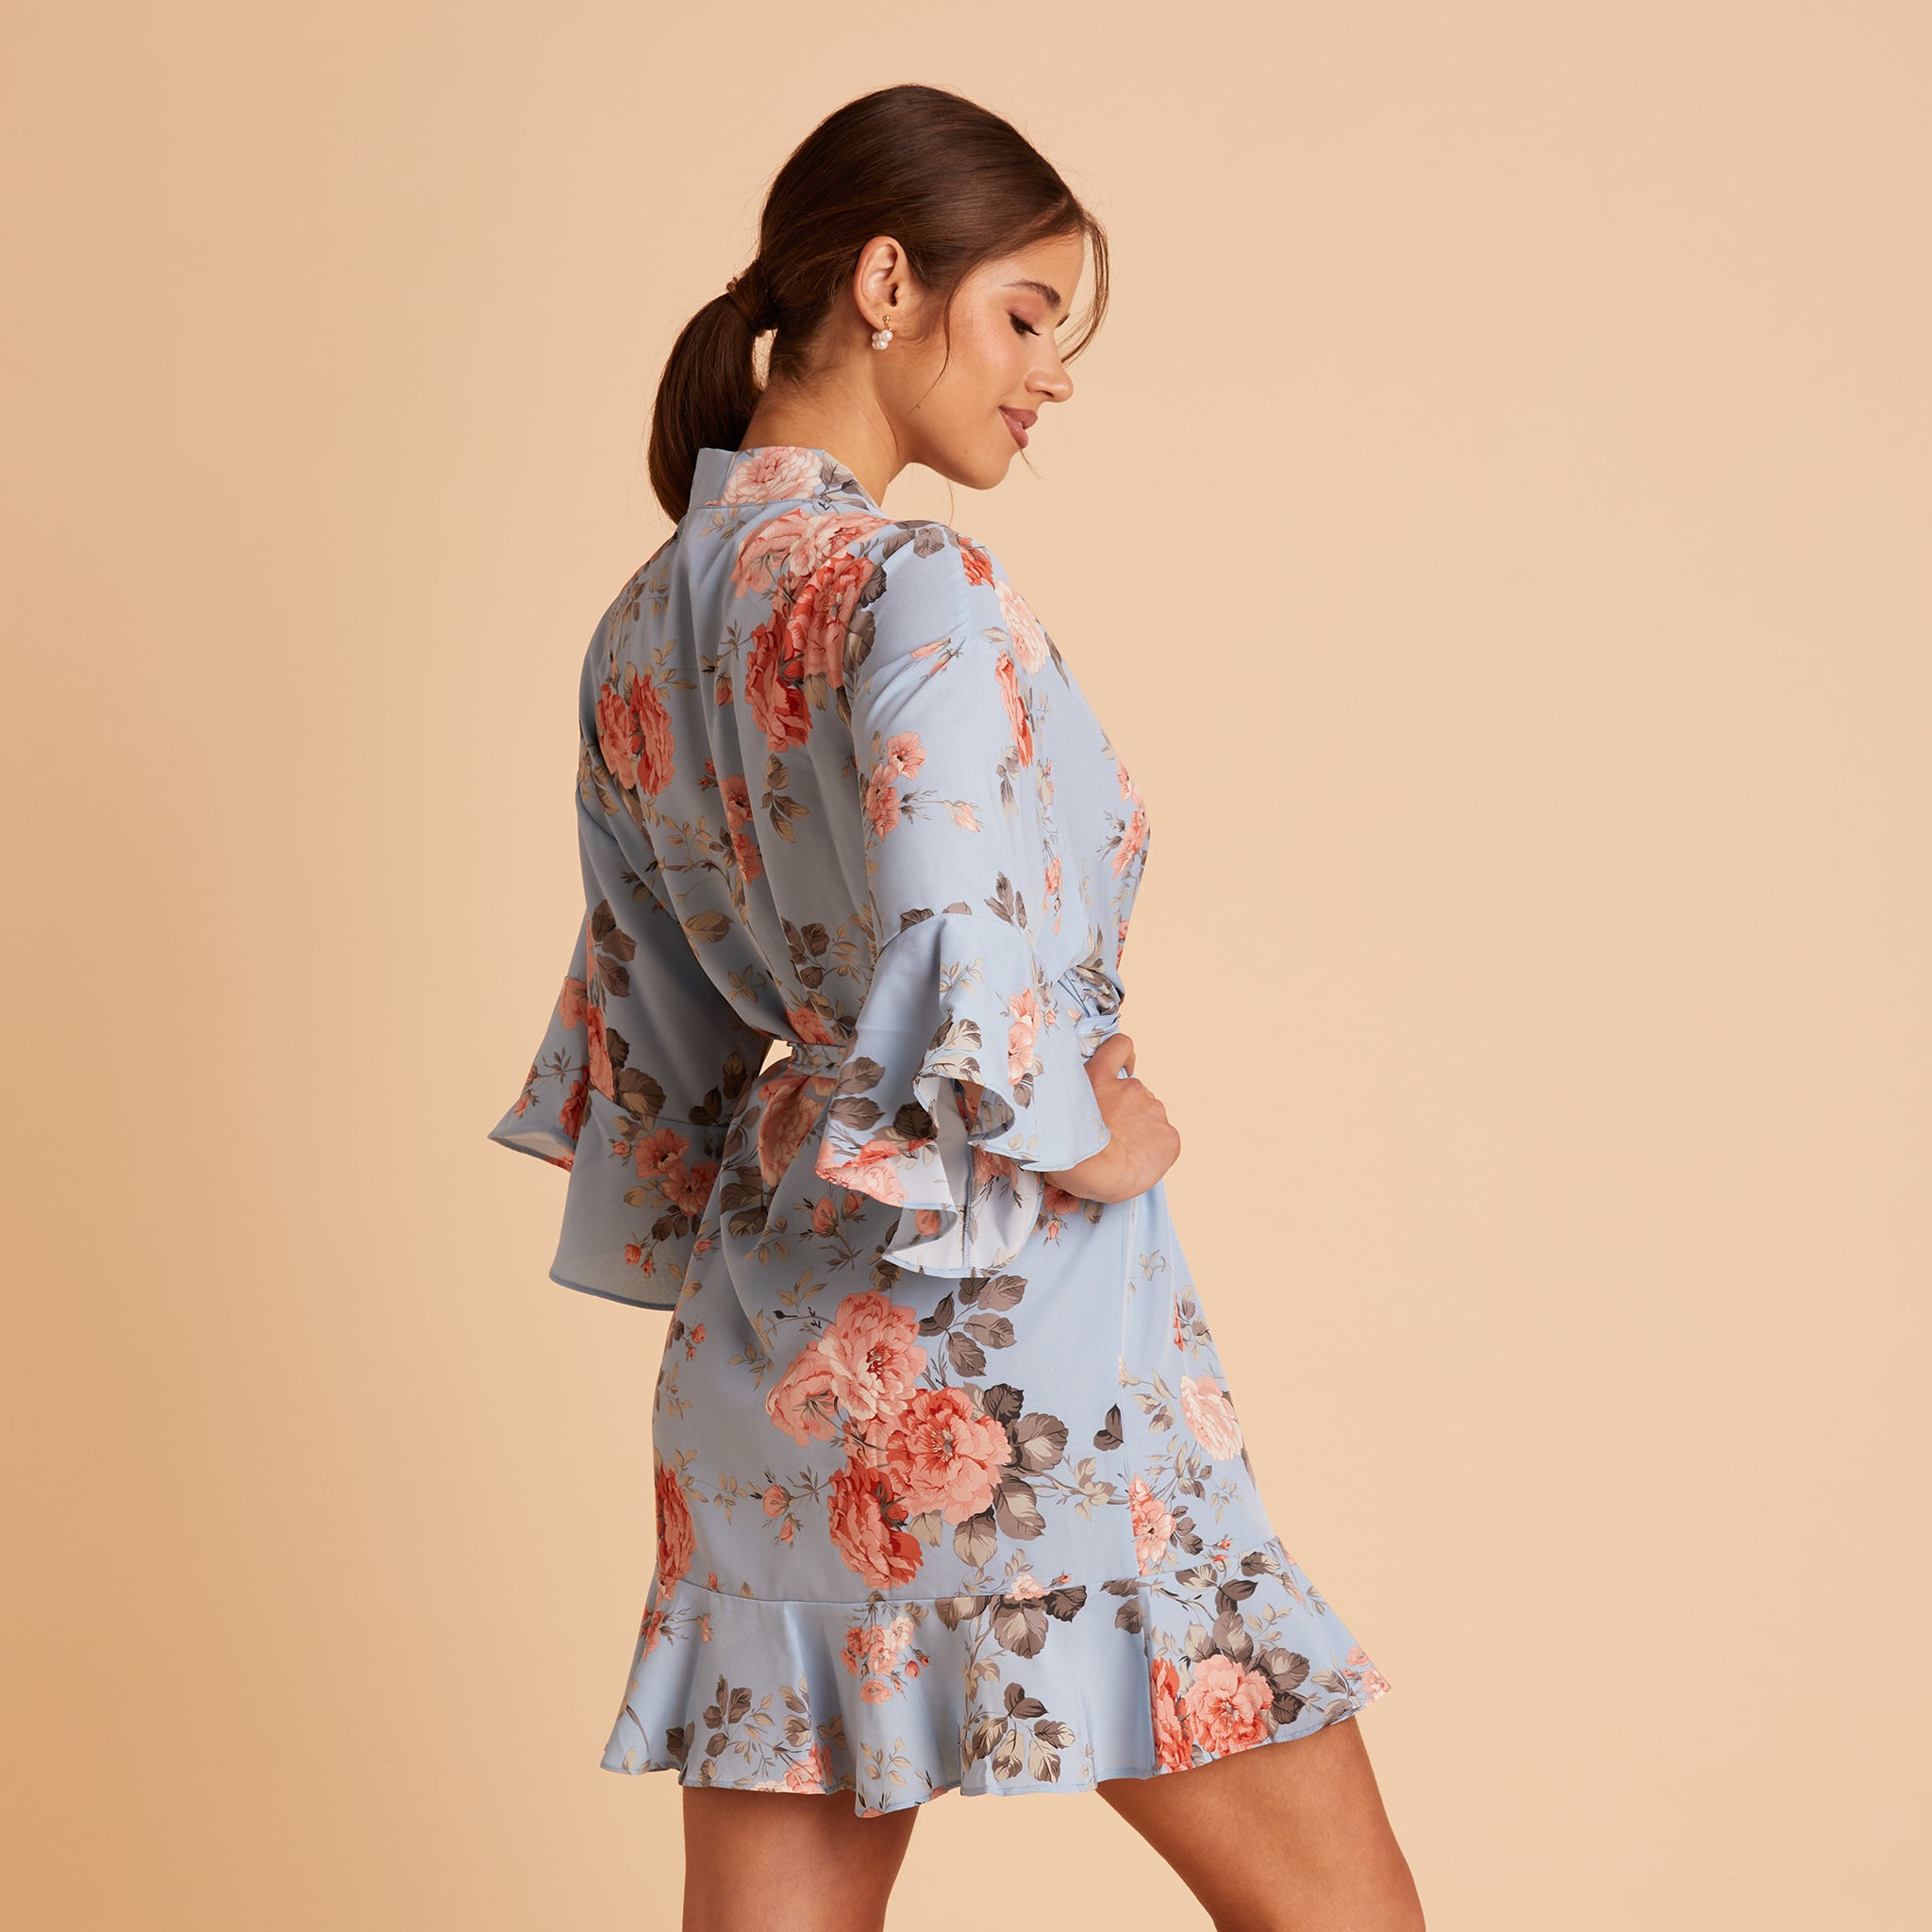 Kenny Ruffle Robe in Dusty Blue Floral by Birdy Grey, side view